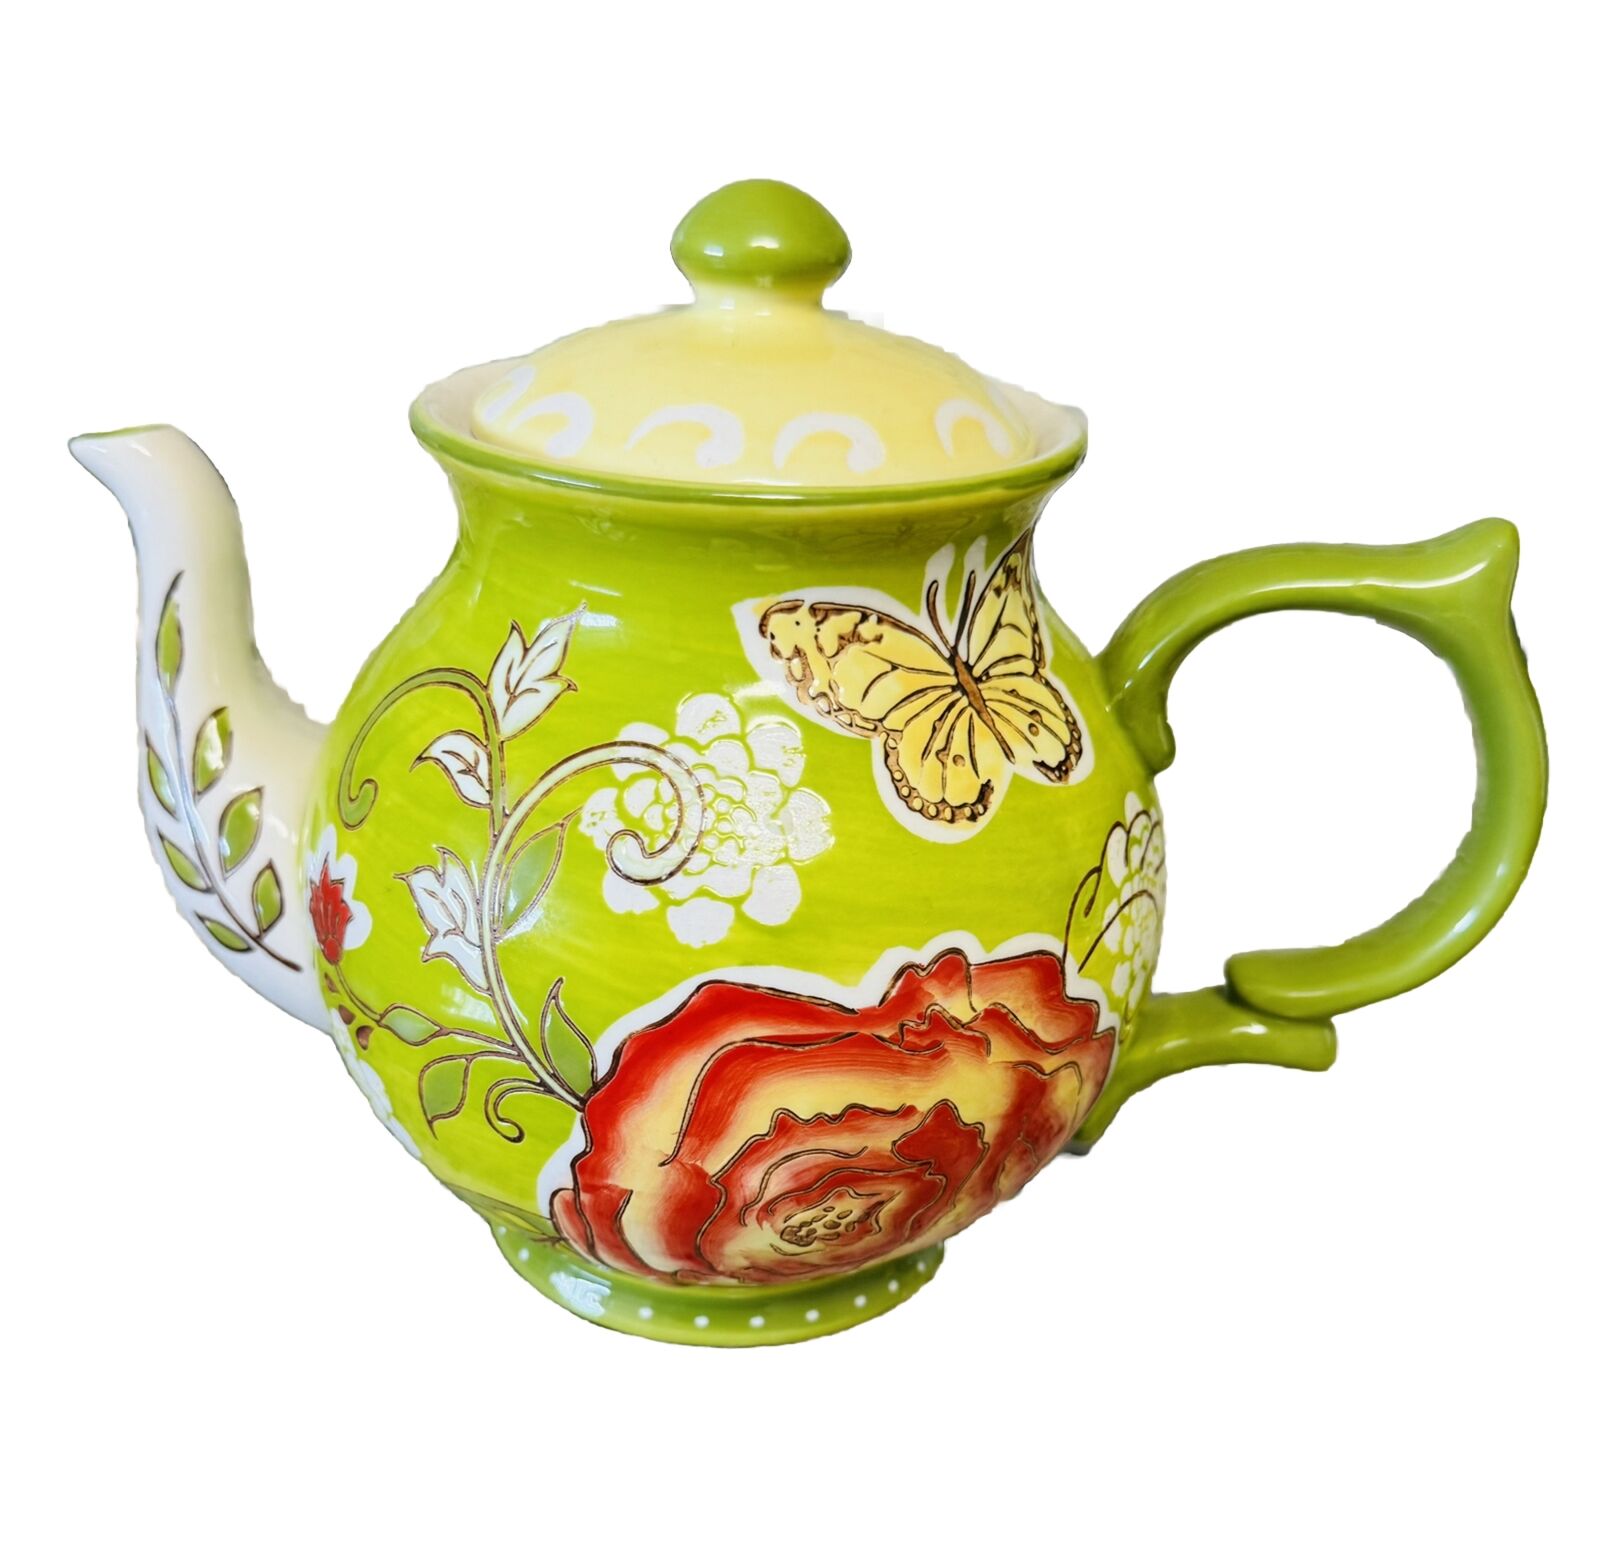 Beautiful Ashland Signature Accents Teapot Floral and Lime Green Vintage